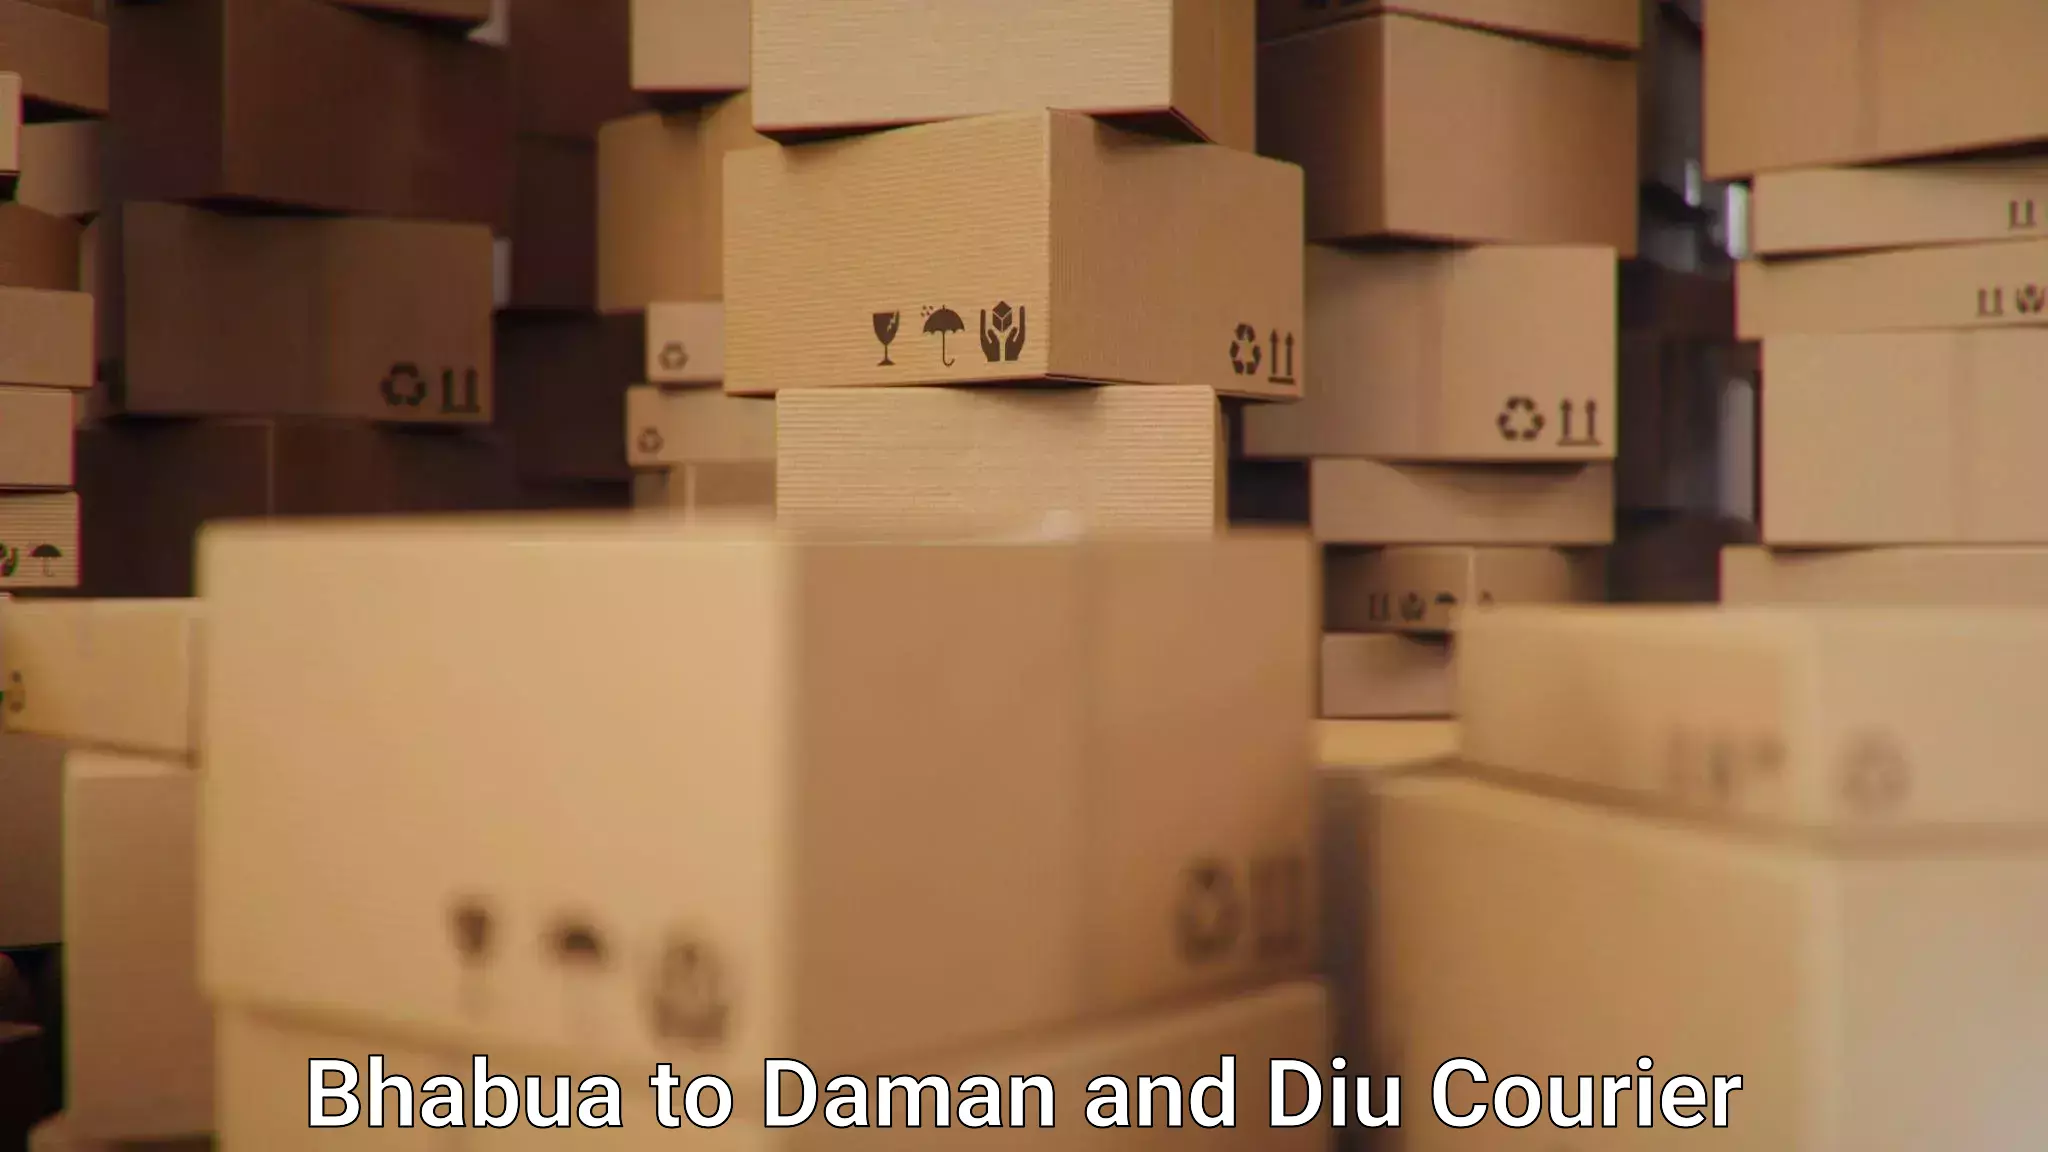 Express delivery capabilities Bhabua to Daman and Diu